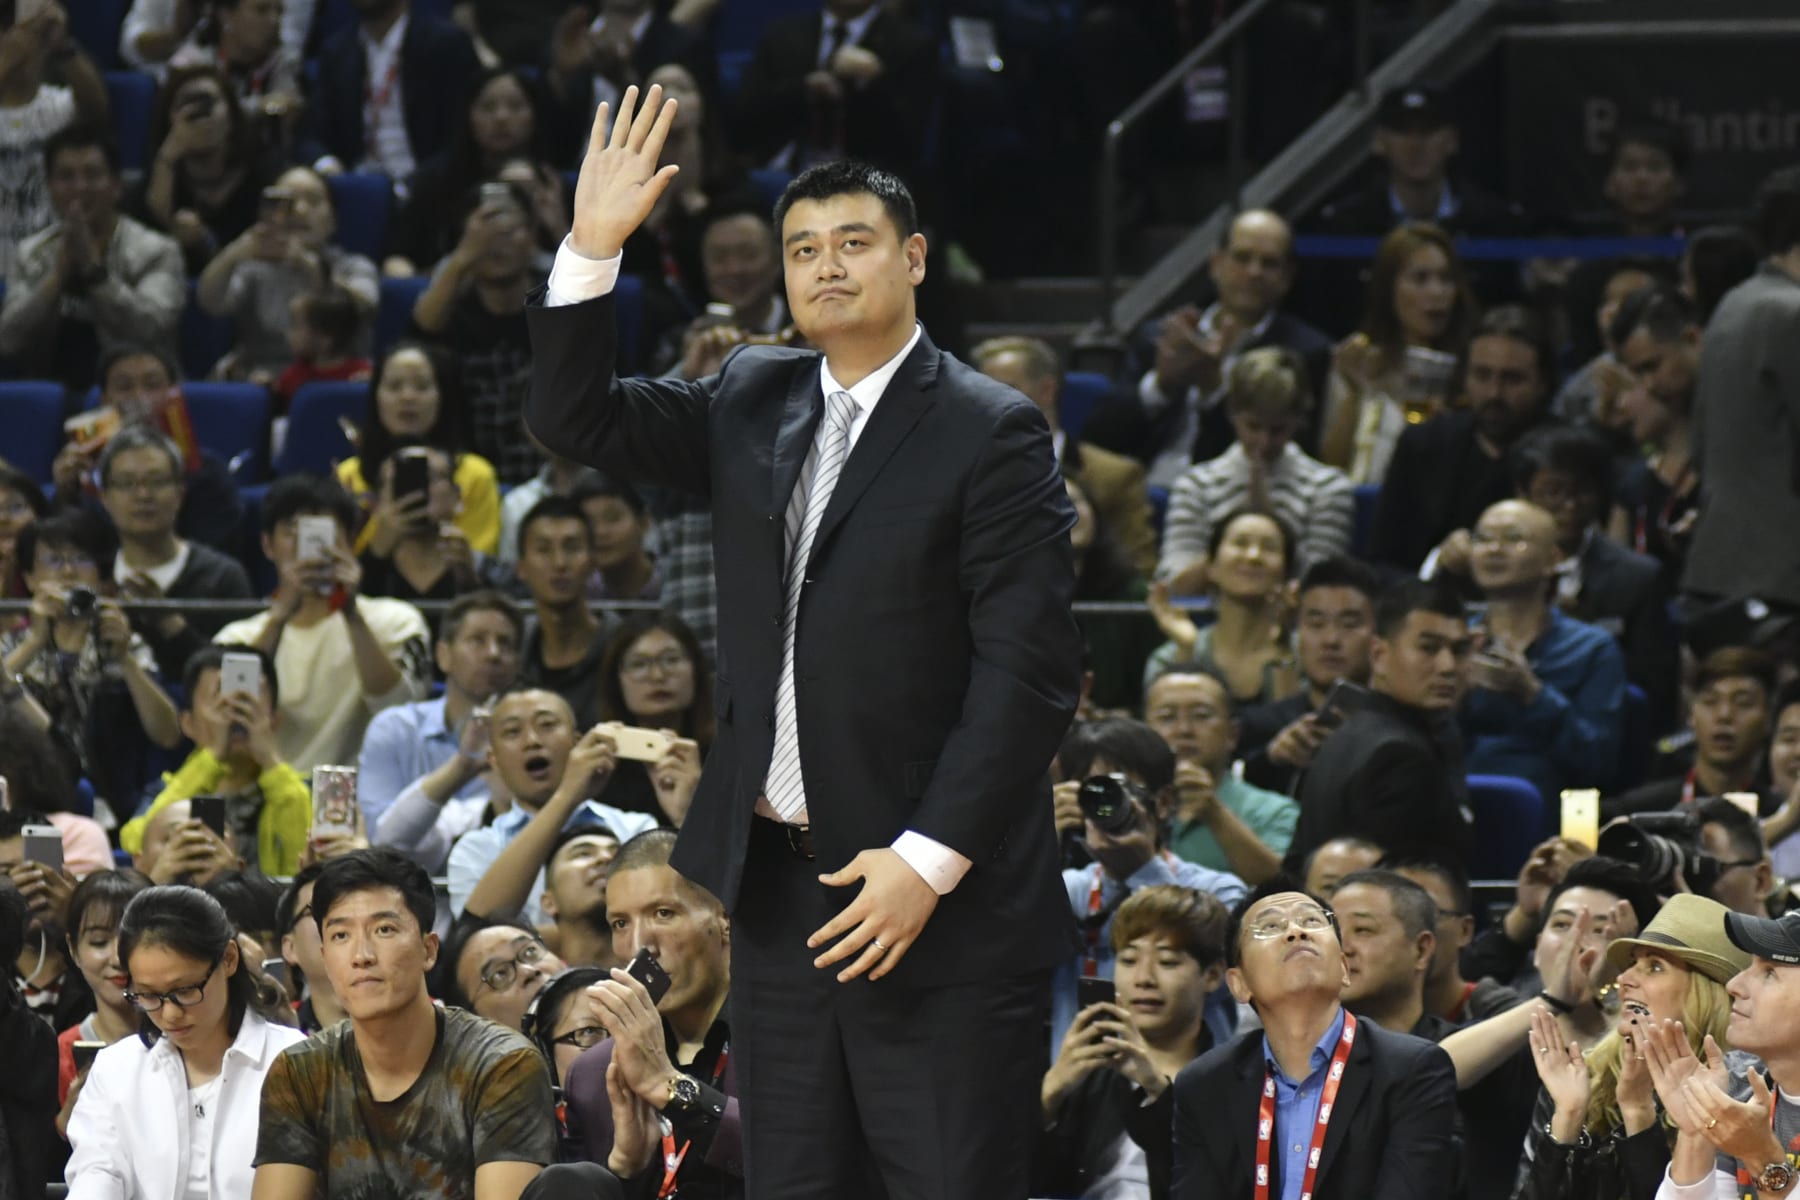 Yao Ming Reportedly to Be Inducted into Basketball Hall of Fame